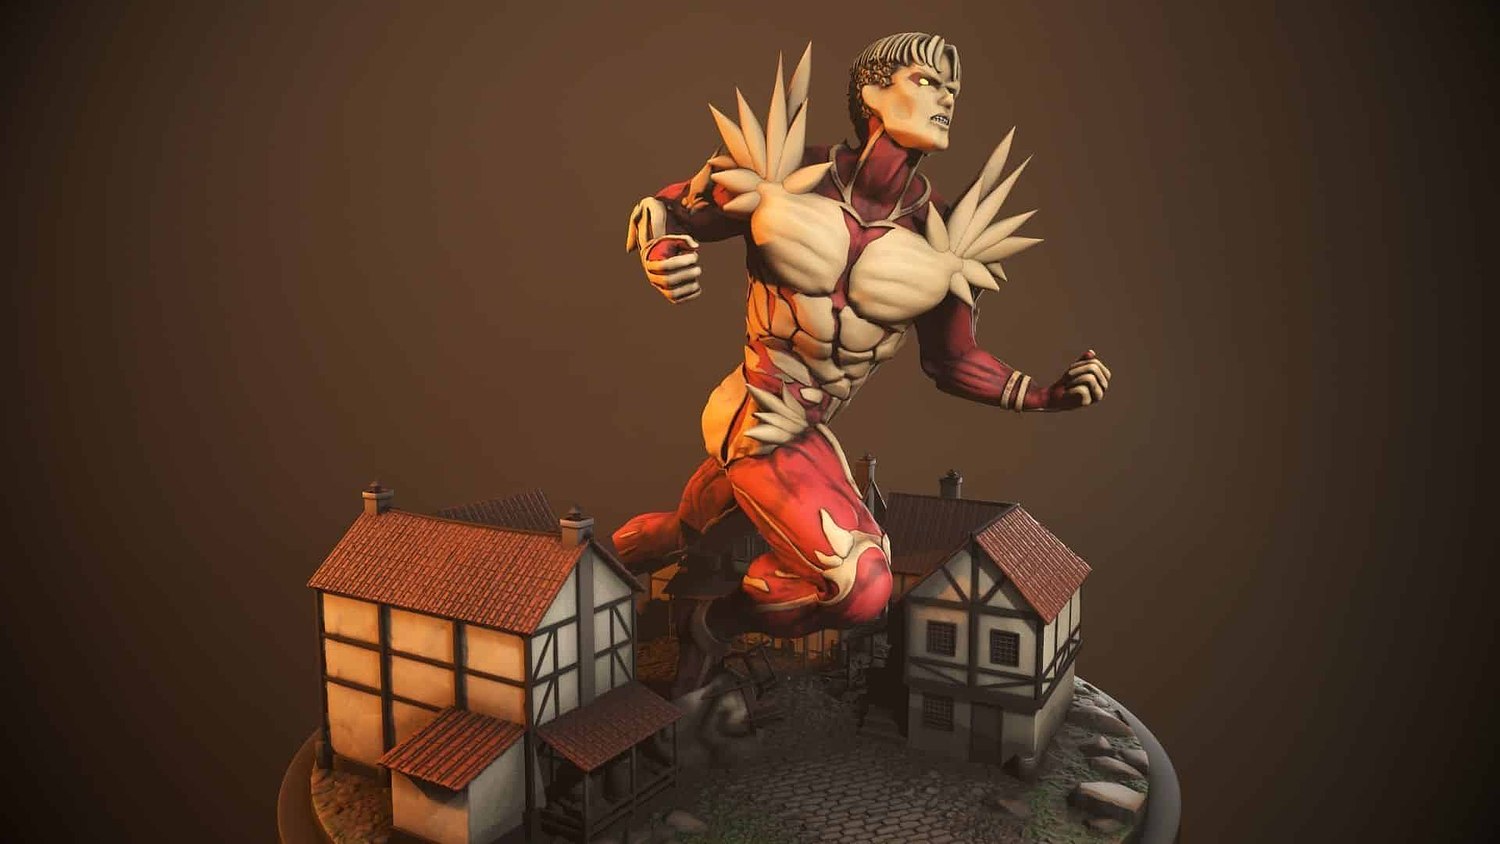 Reiner Armored Titan From Attack On Titan